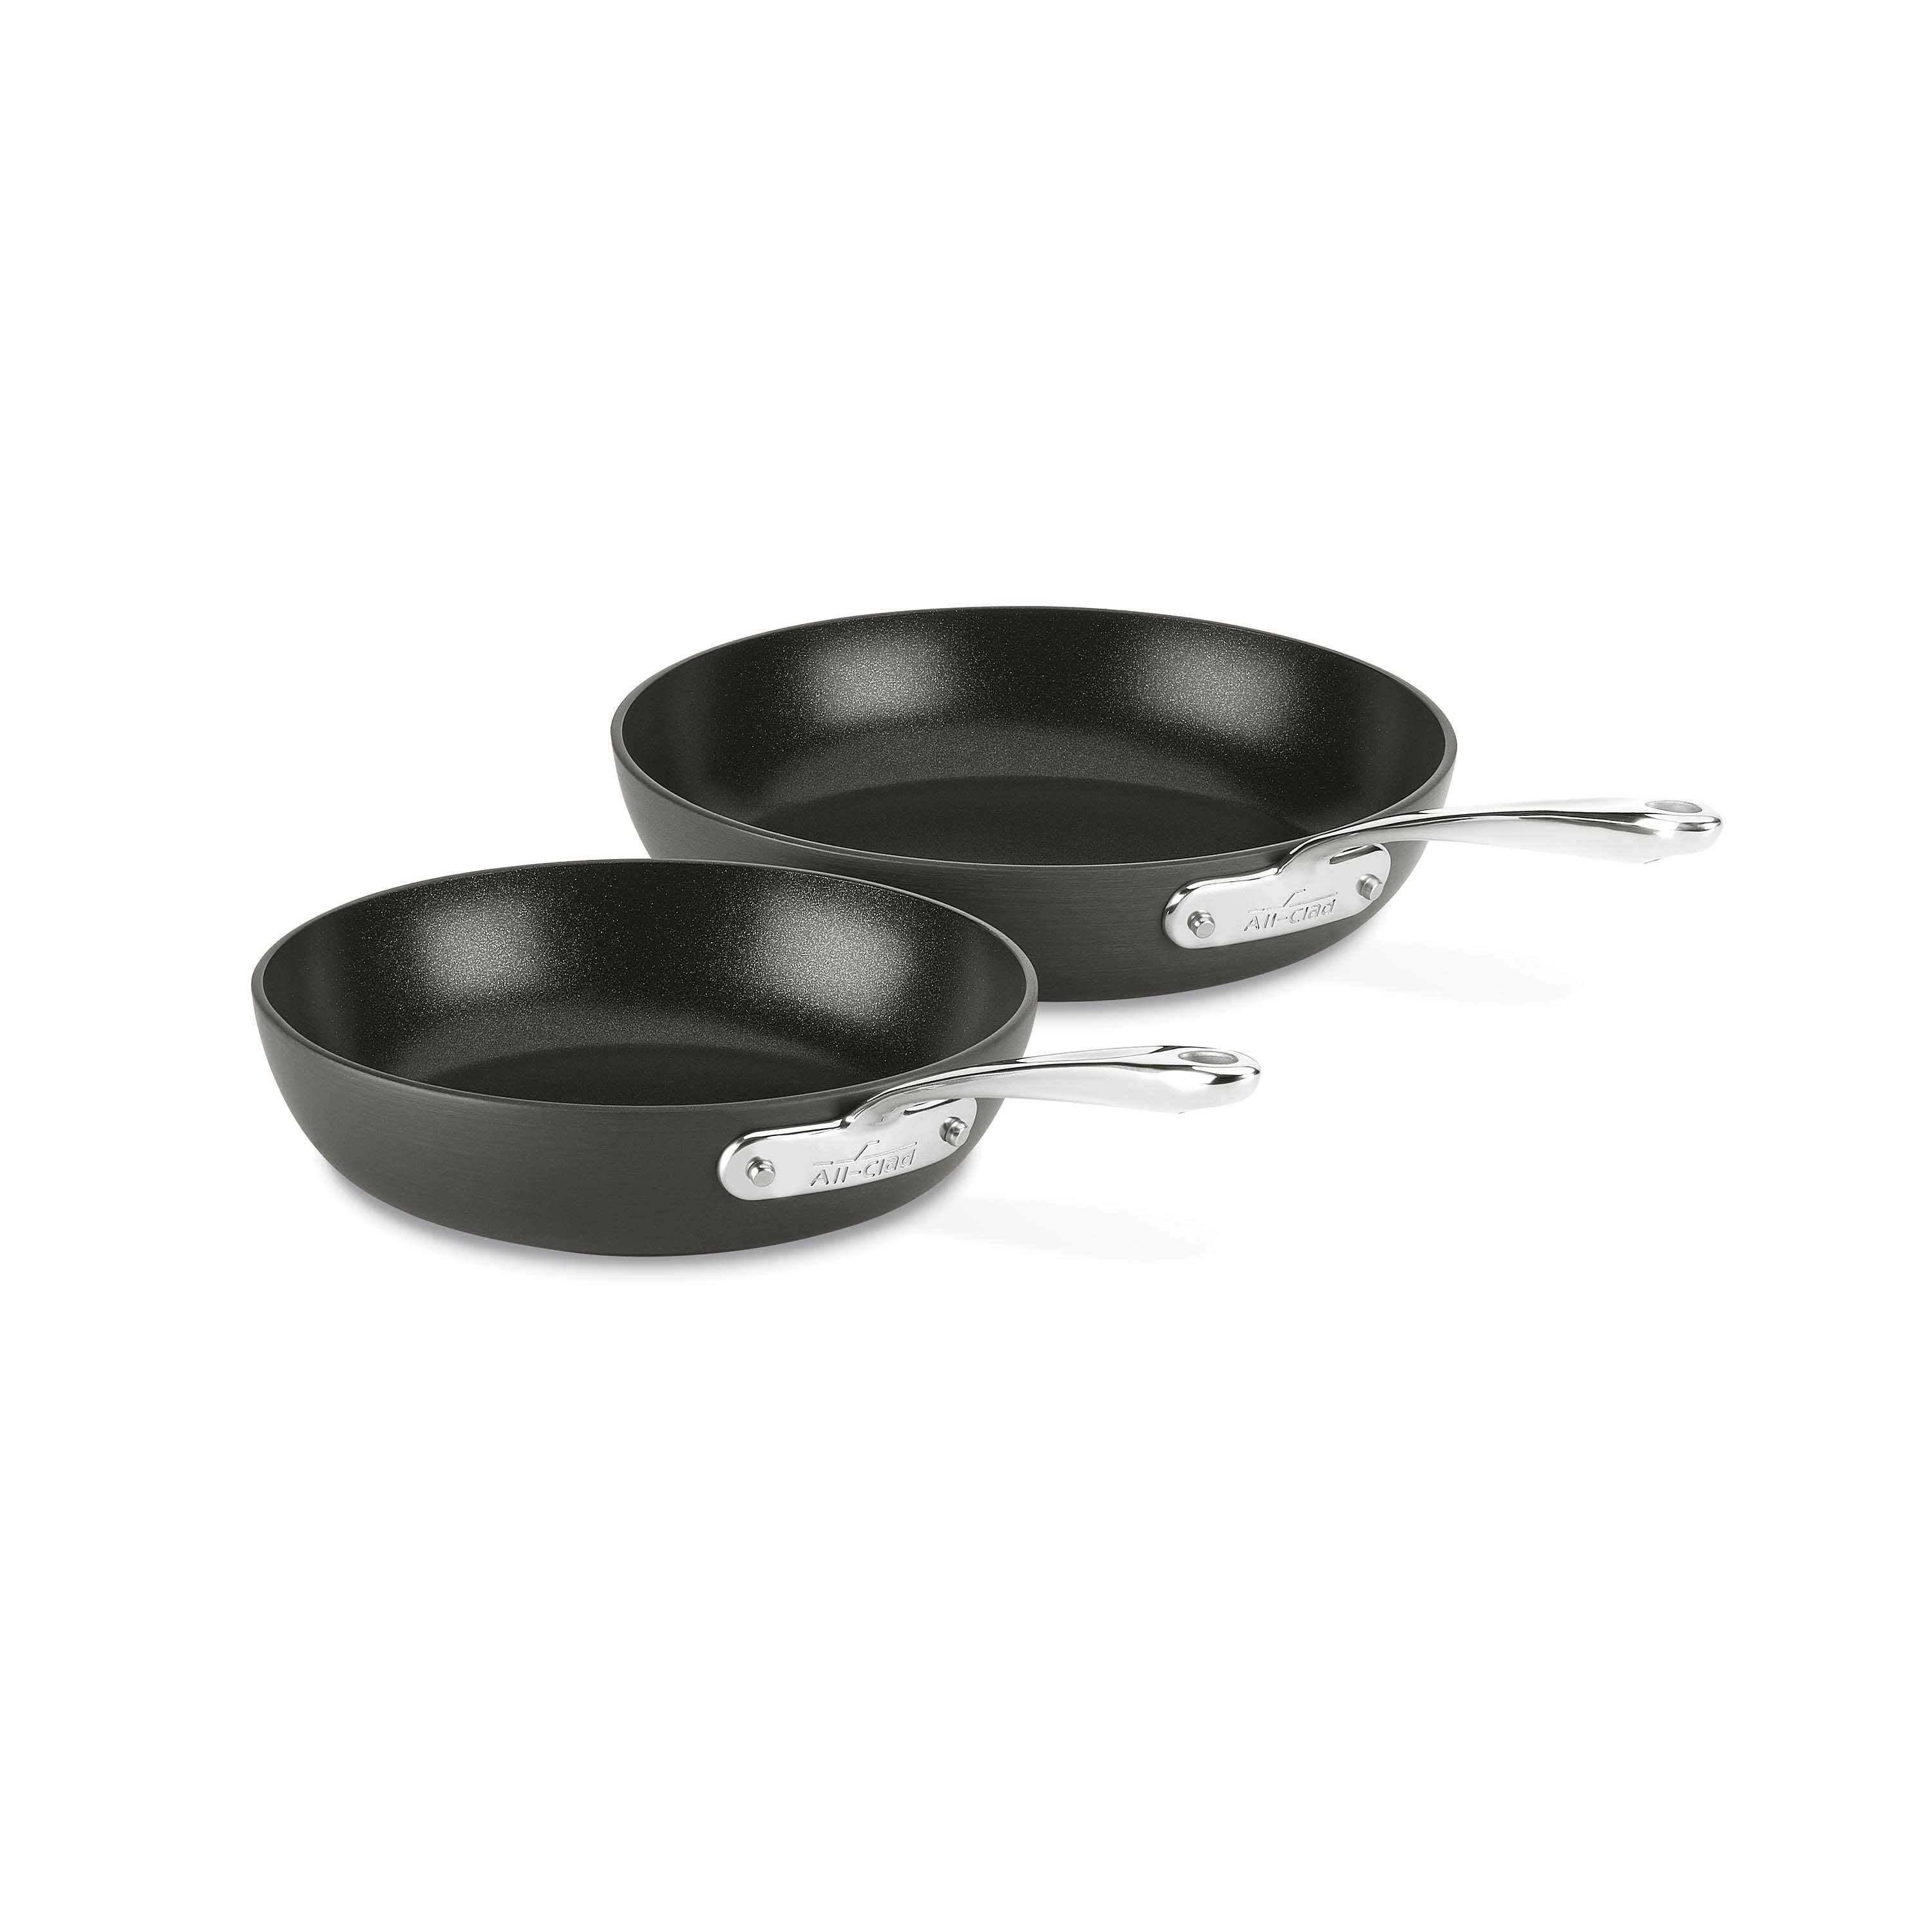 Dash Nonstick Hard Anodized 10 inch and 12 inch Fry Pan Cookware Set